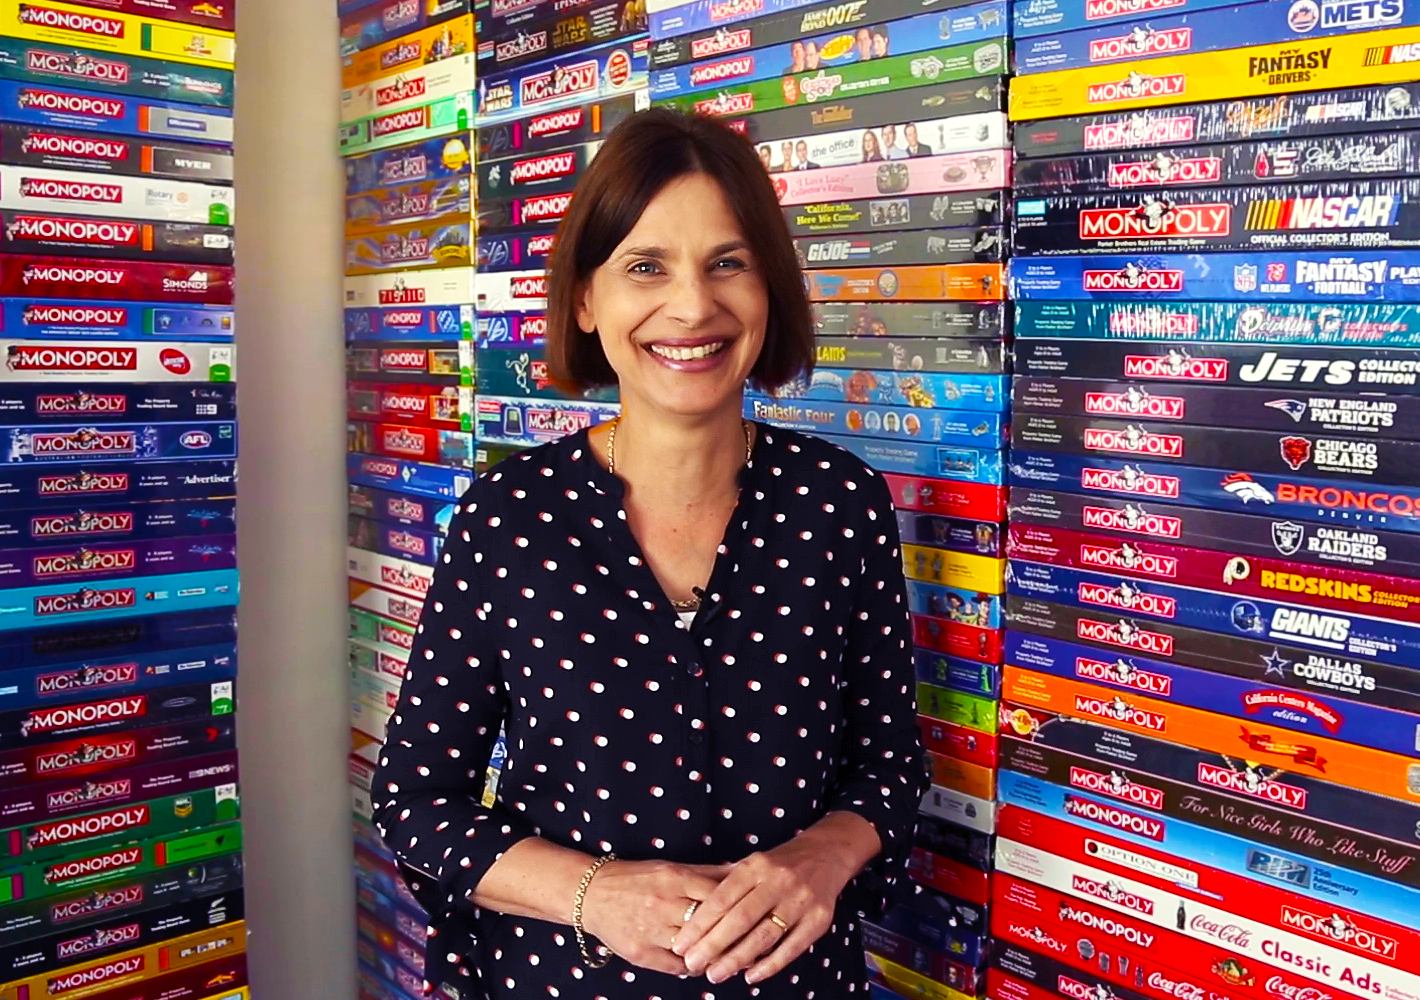 All aboard: collector Sonia Williams says she has played Monopoly only about three times in the last 10 years.